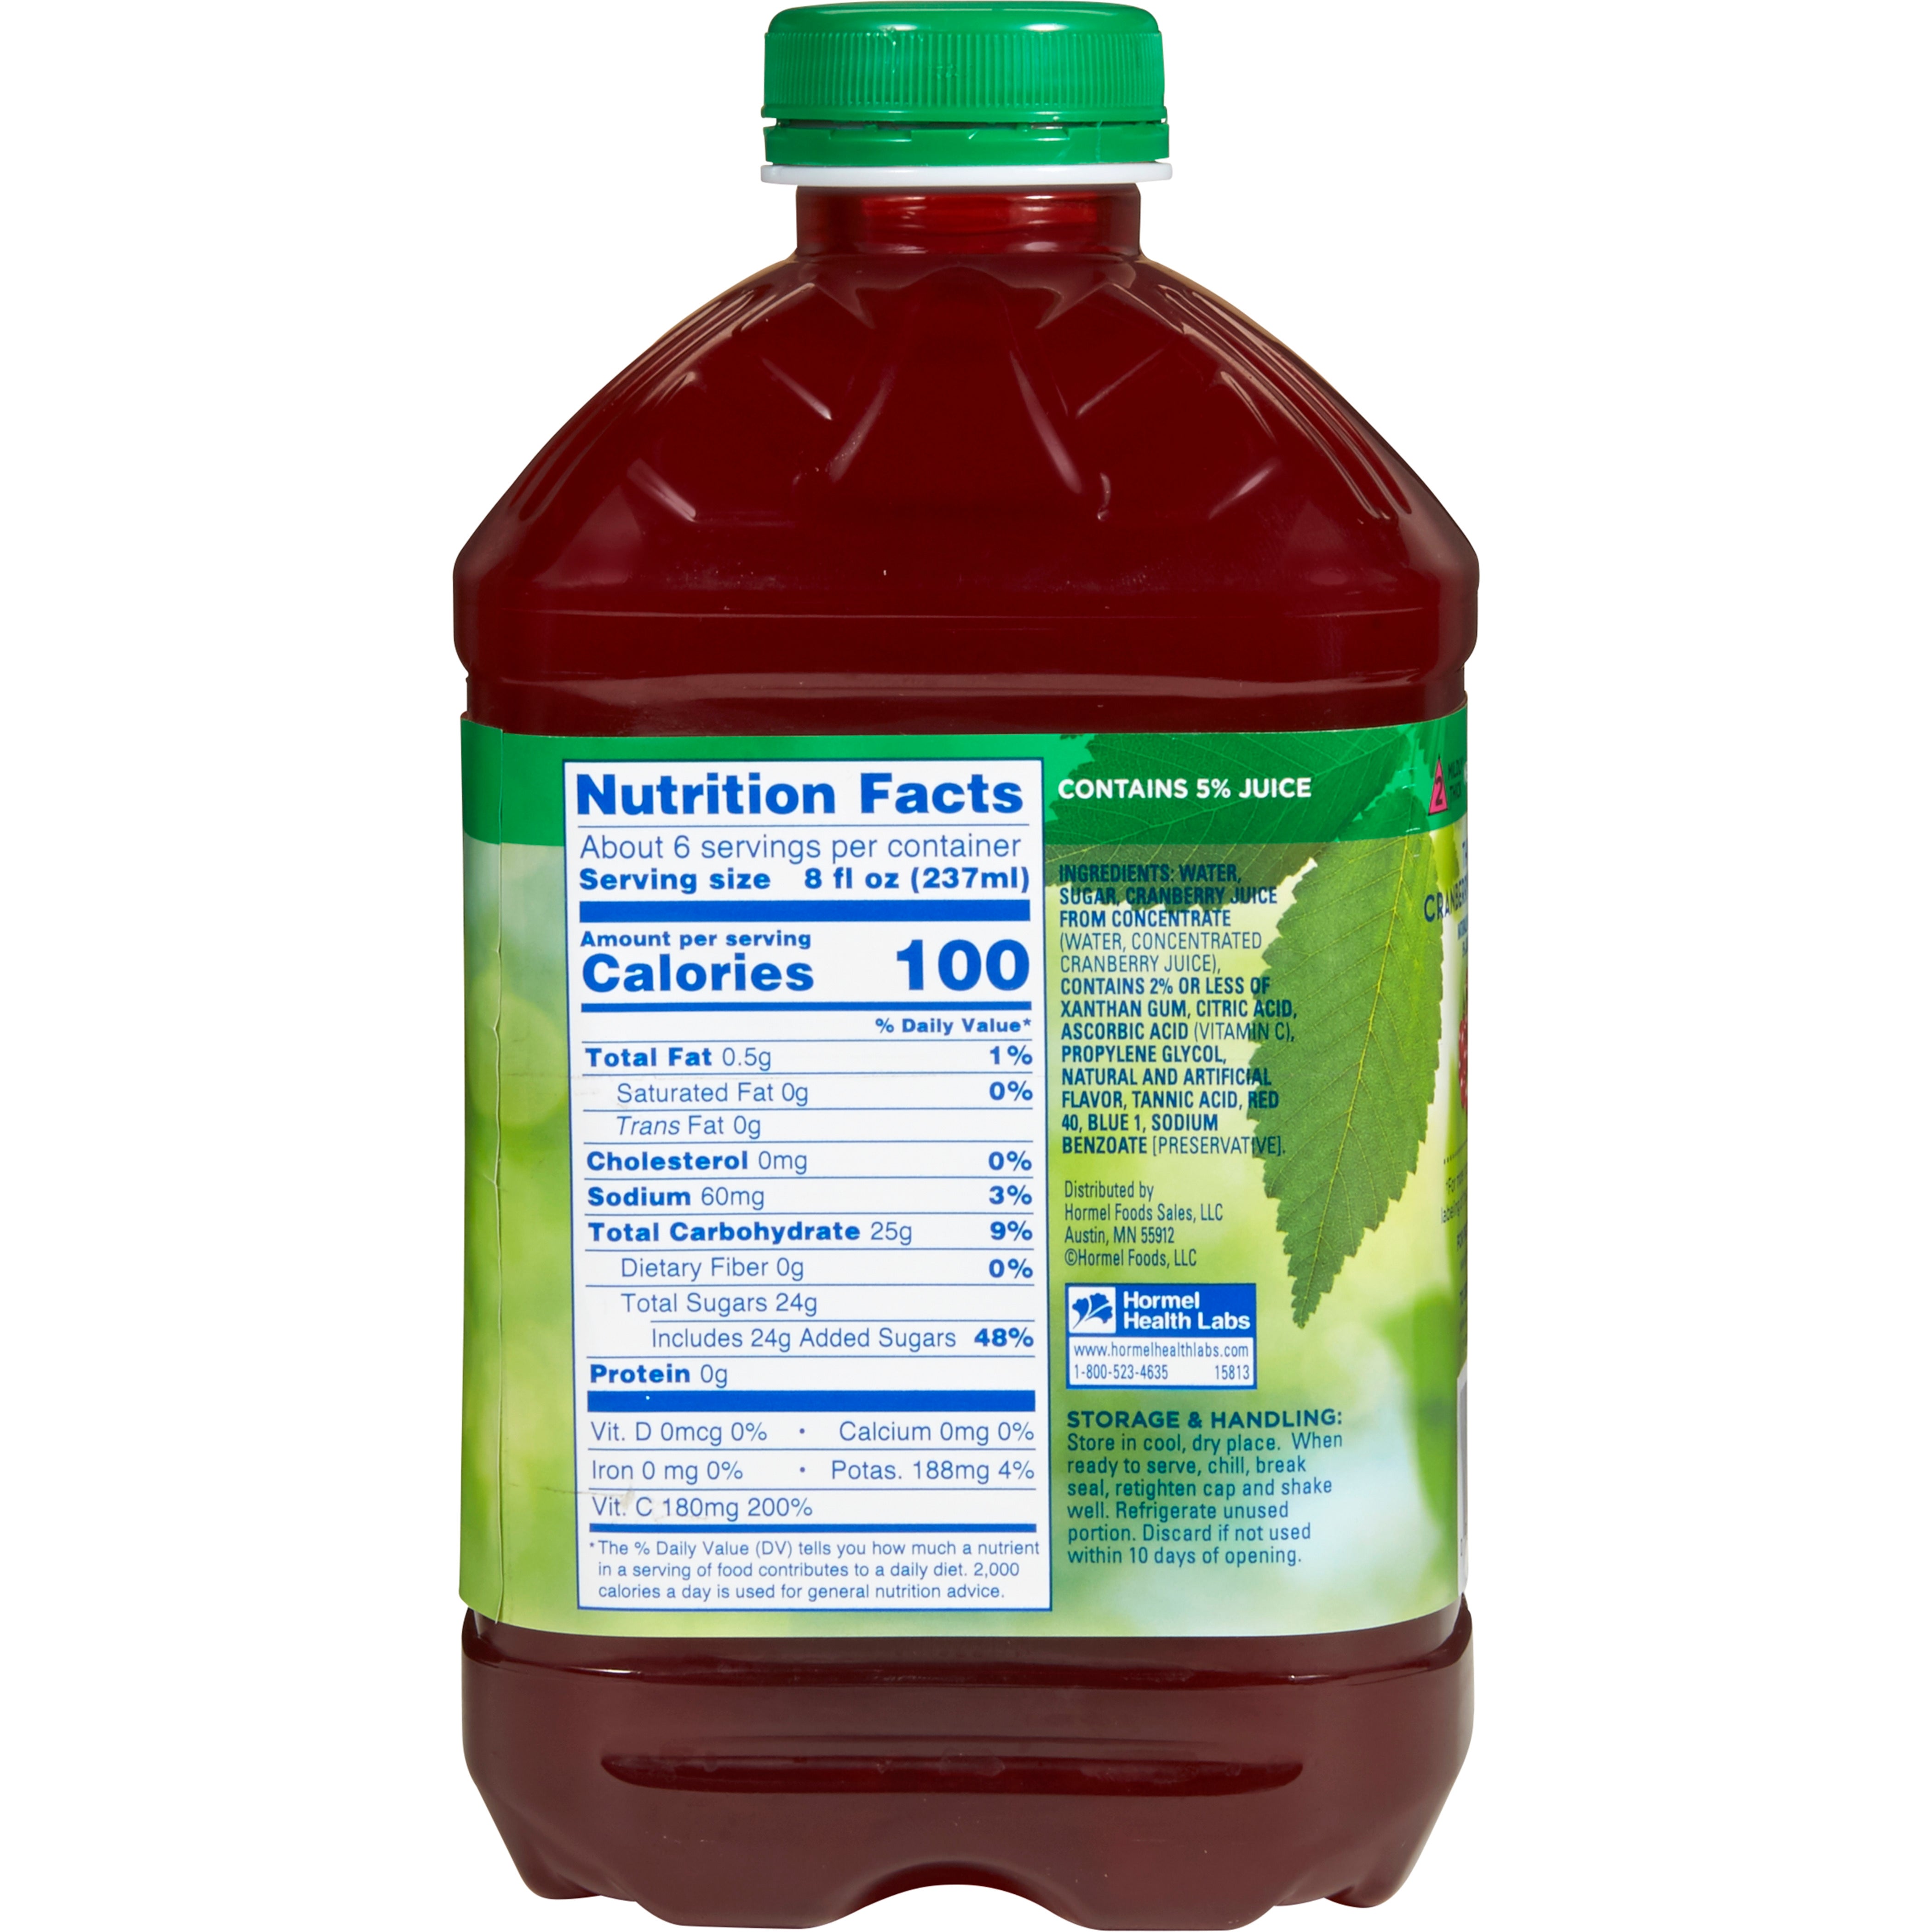 Thickened Beverage Thick & Easy 46 oz. Bottle Cranberry Juice Cocktail Flavor Liquid IDDSI Level 2 Mildly Thick